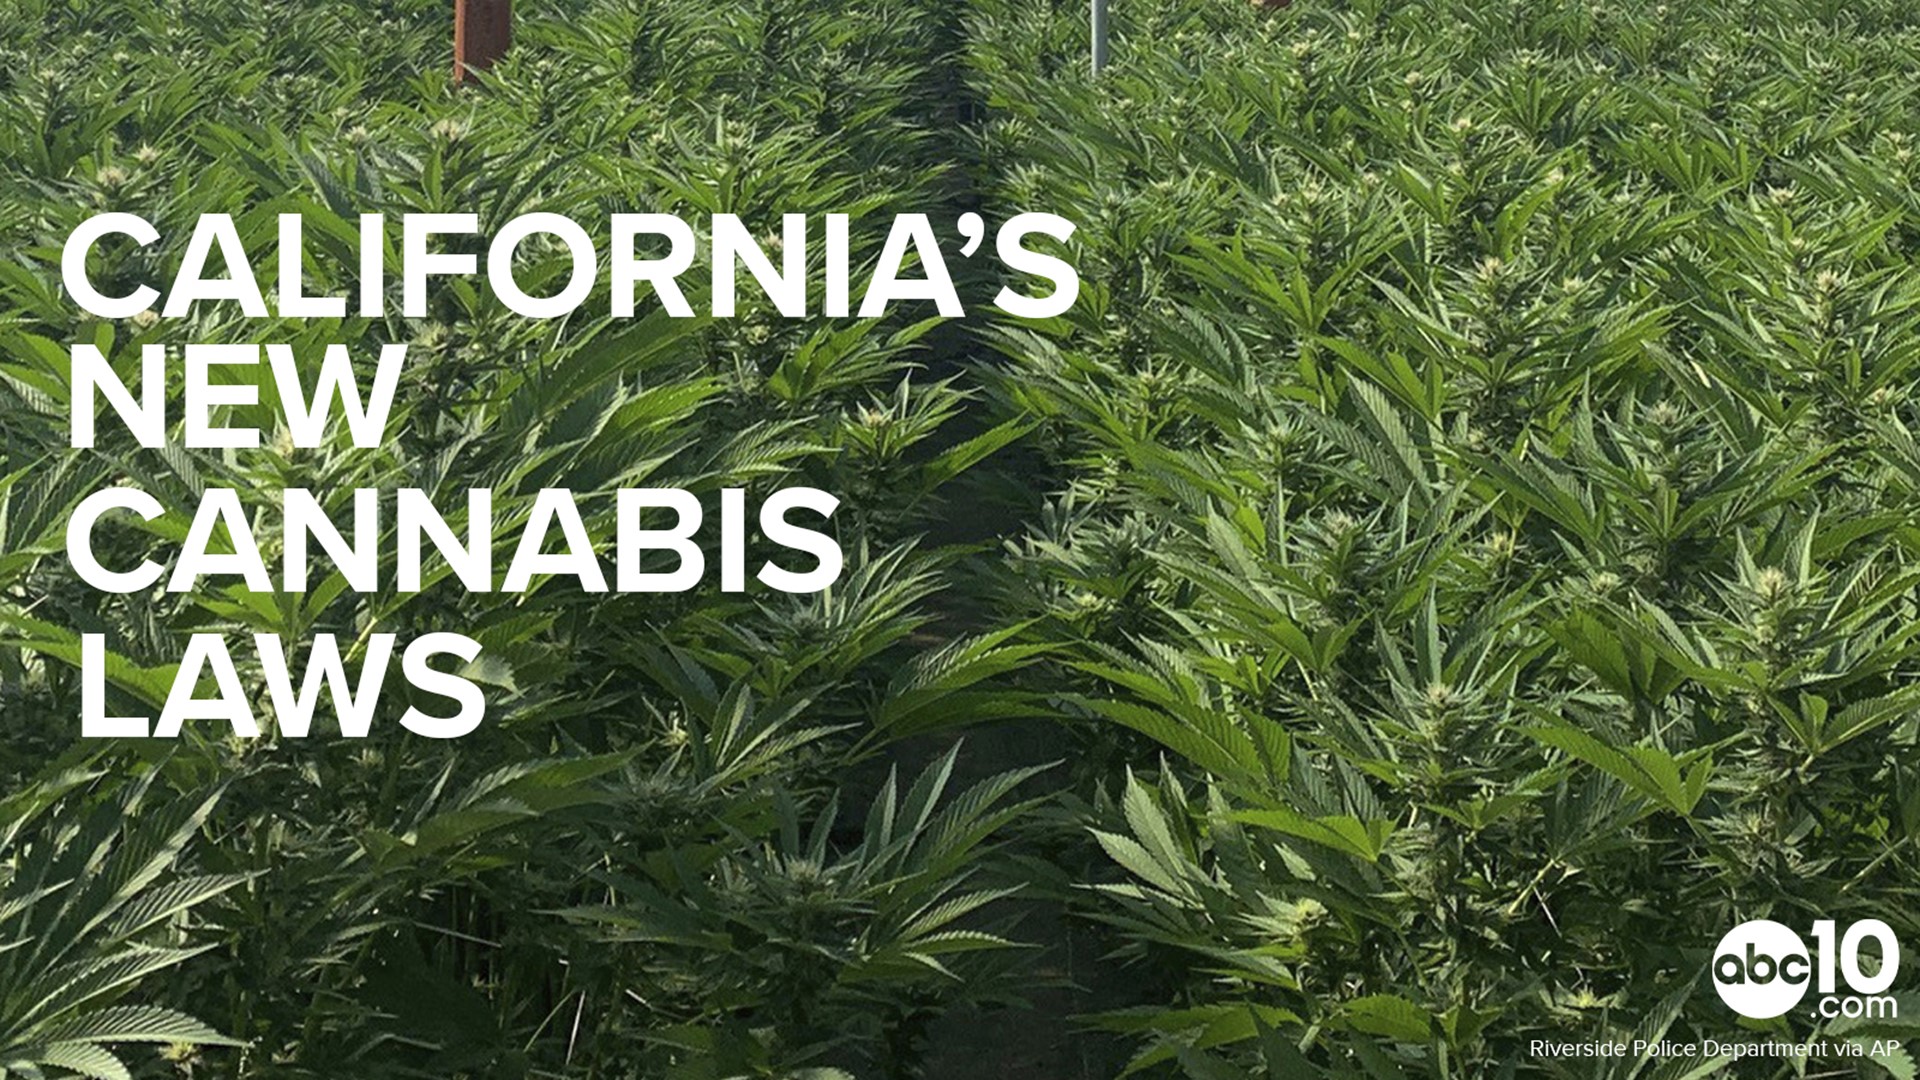 California passed two new laws that will affect the marijuana industry. Assembly Bill 1793 speeds up the process for people who may be eligible to have pot-related convictions dismissed. AB 3067 addresses the marketing of cannabis products to minors.